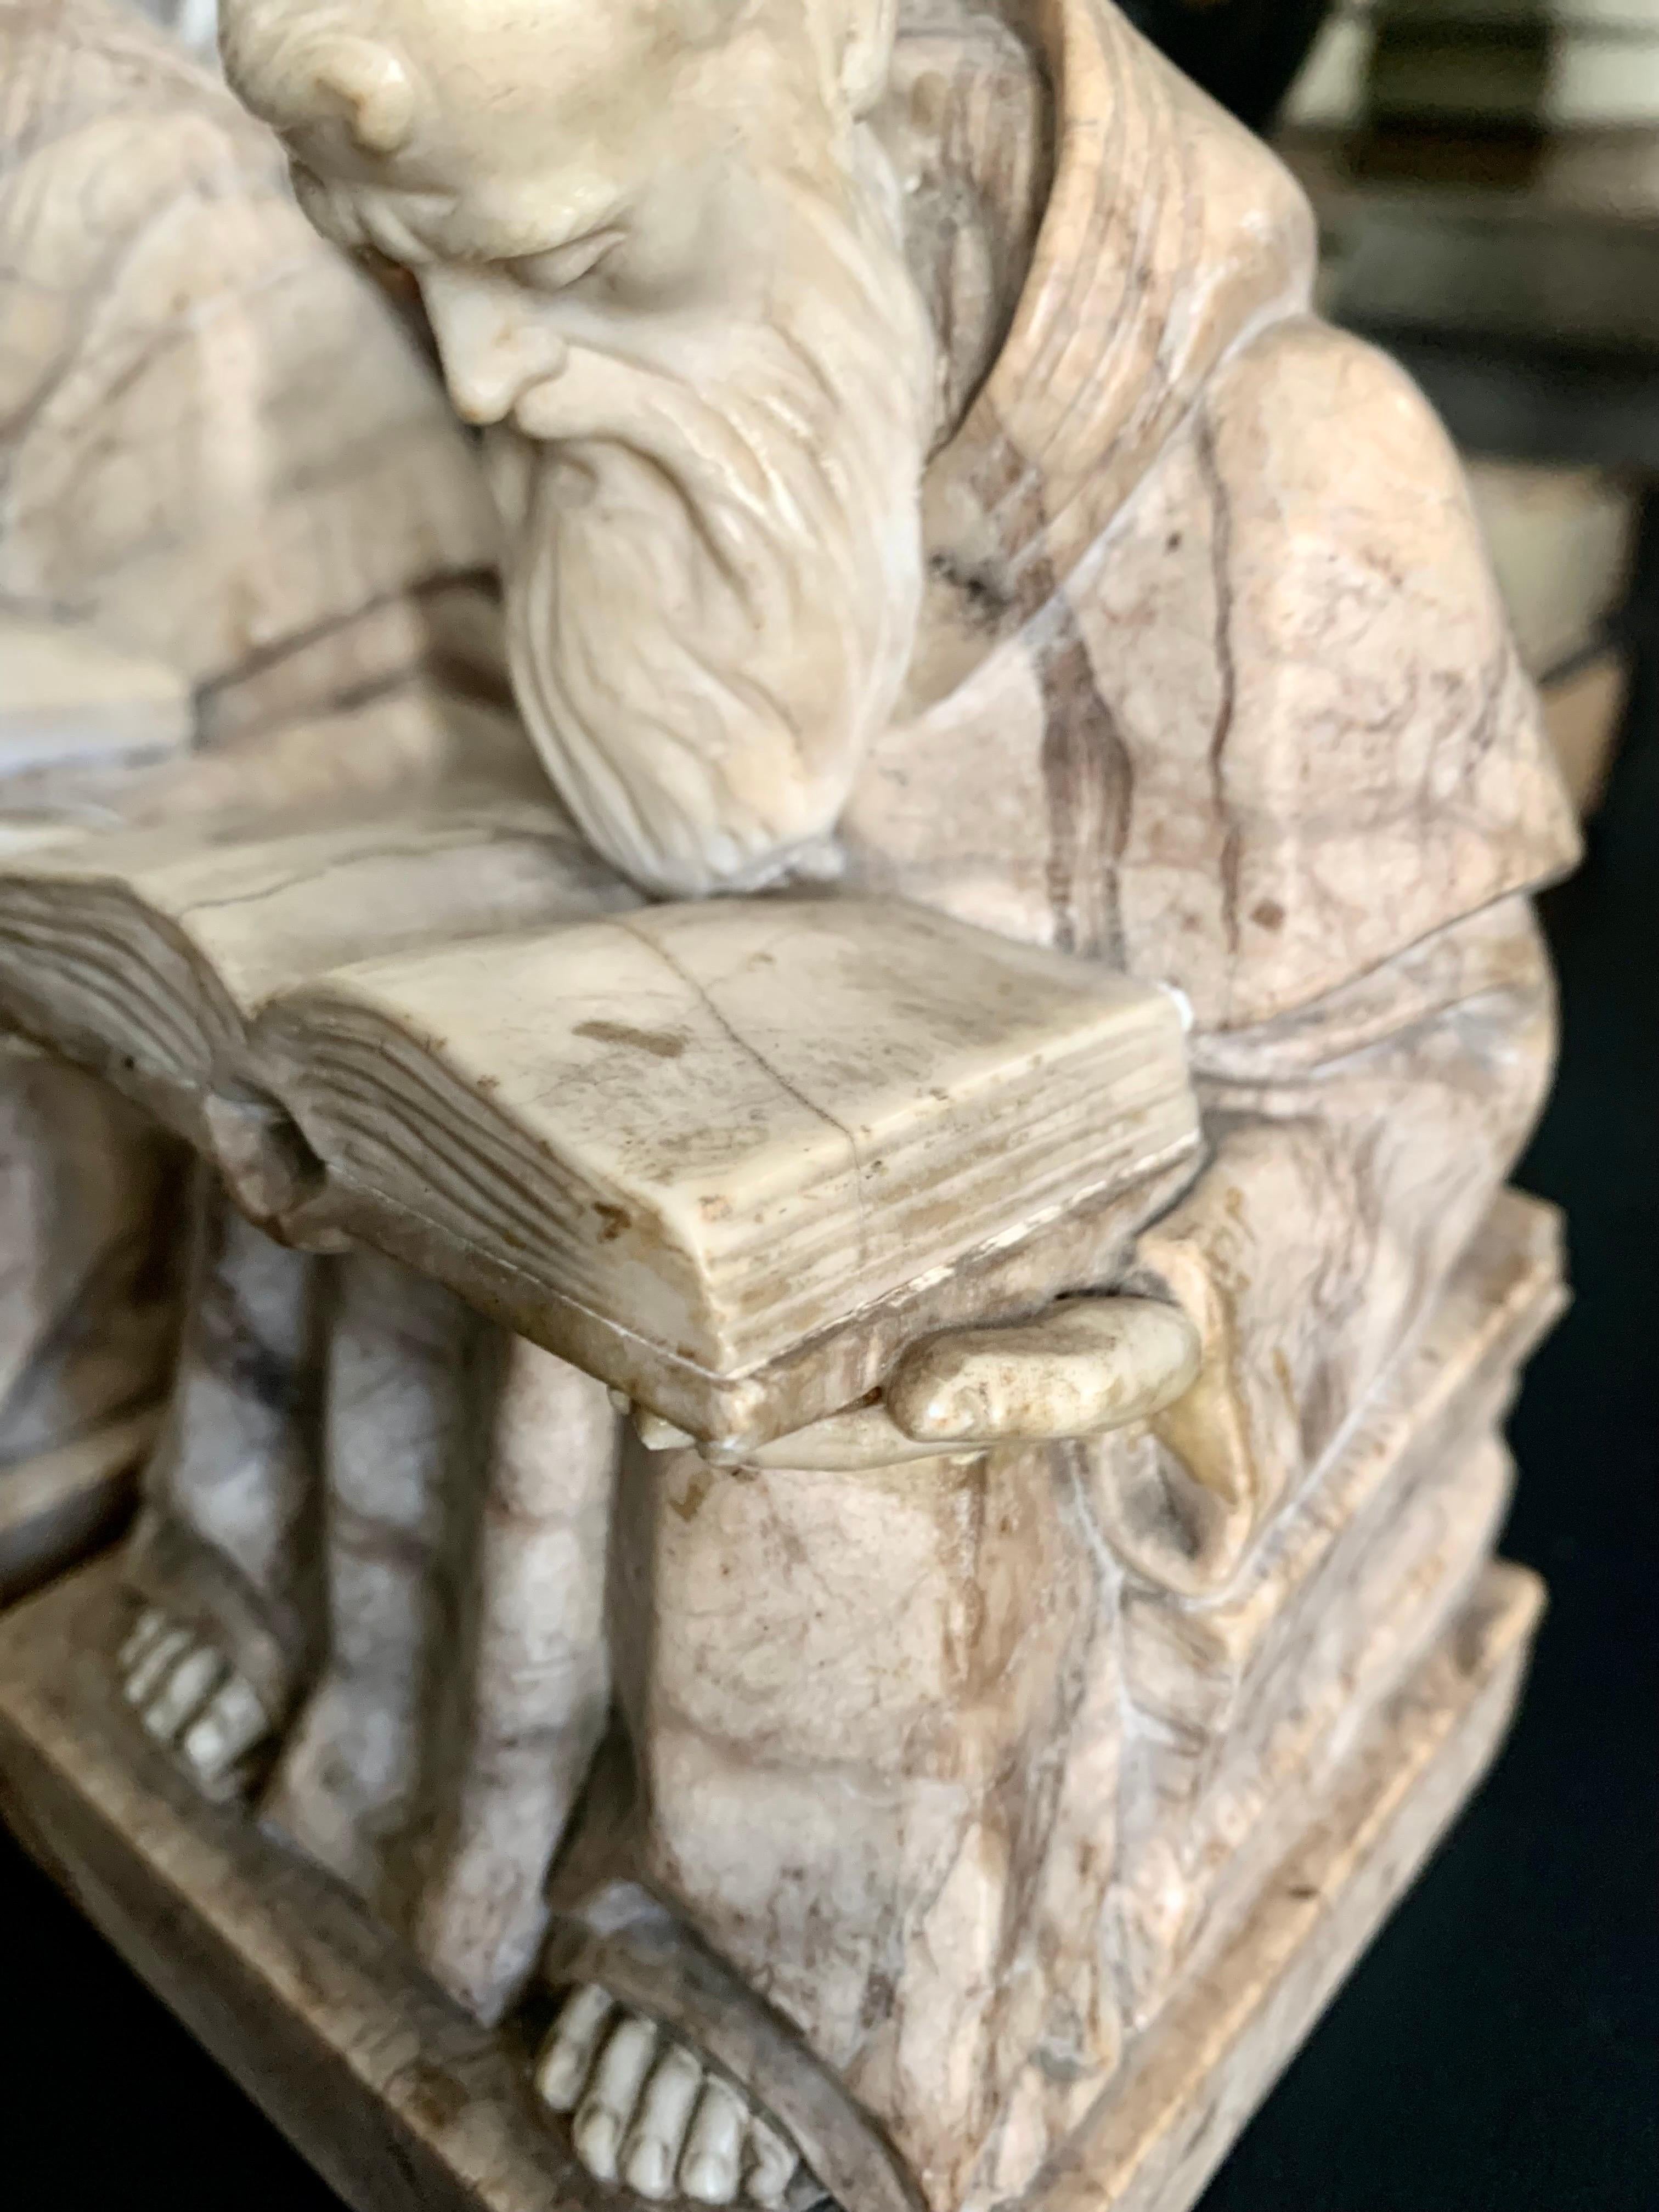 Alabaster and marble bookends representing the figures of monks seated on a throne reading a book in the medieval style, made of marble and alabaster

They have a great quality of work in alabaster that can be seen in the figures of the heads,